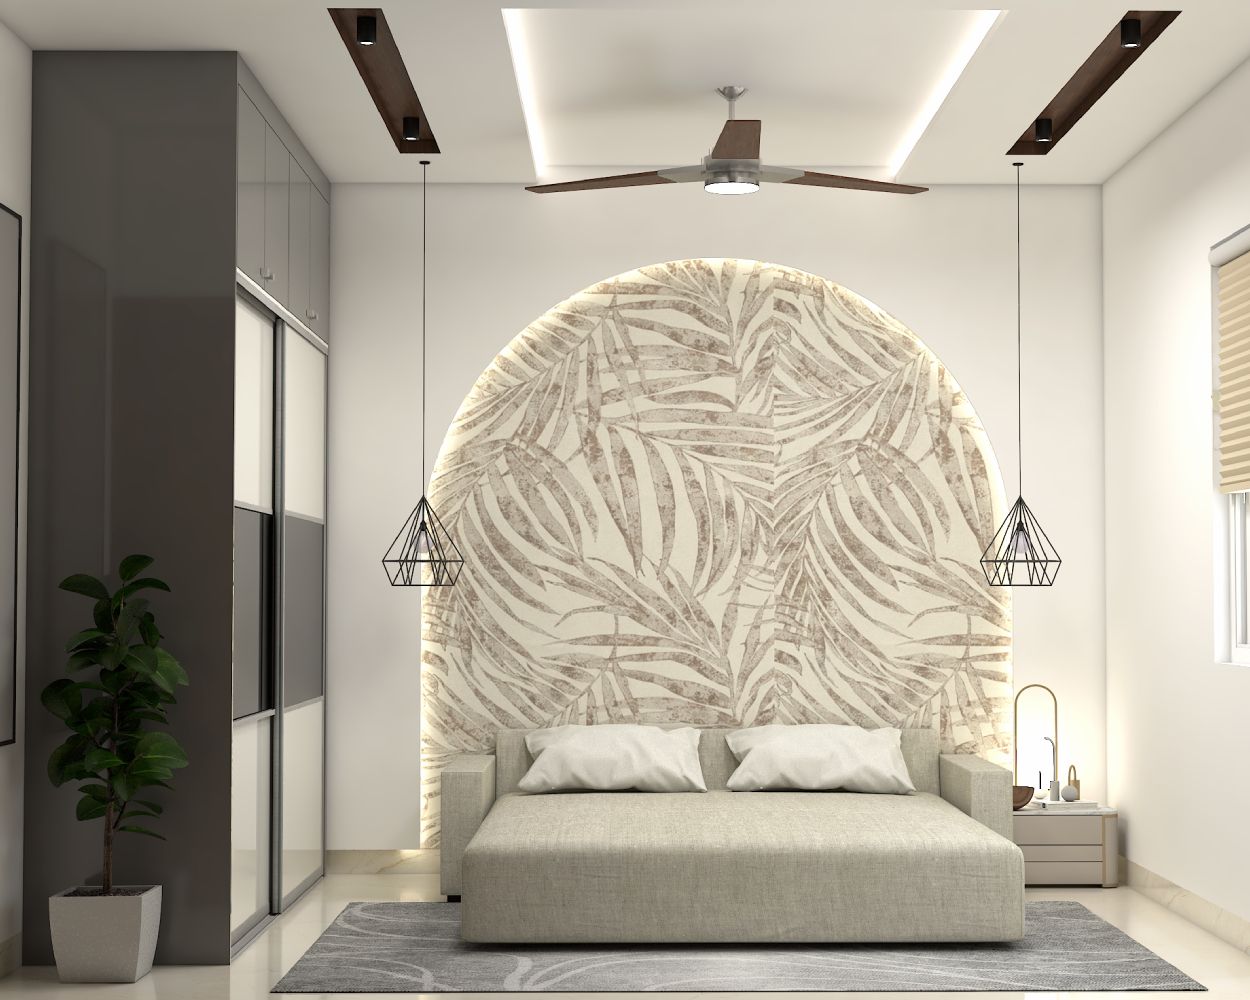 Modern Beige And Grey Guest Room Design With Arched Printed Wallpaper